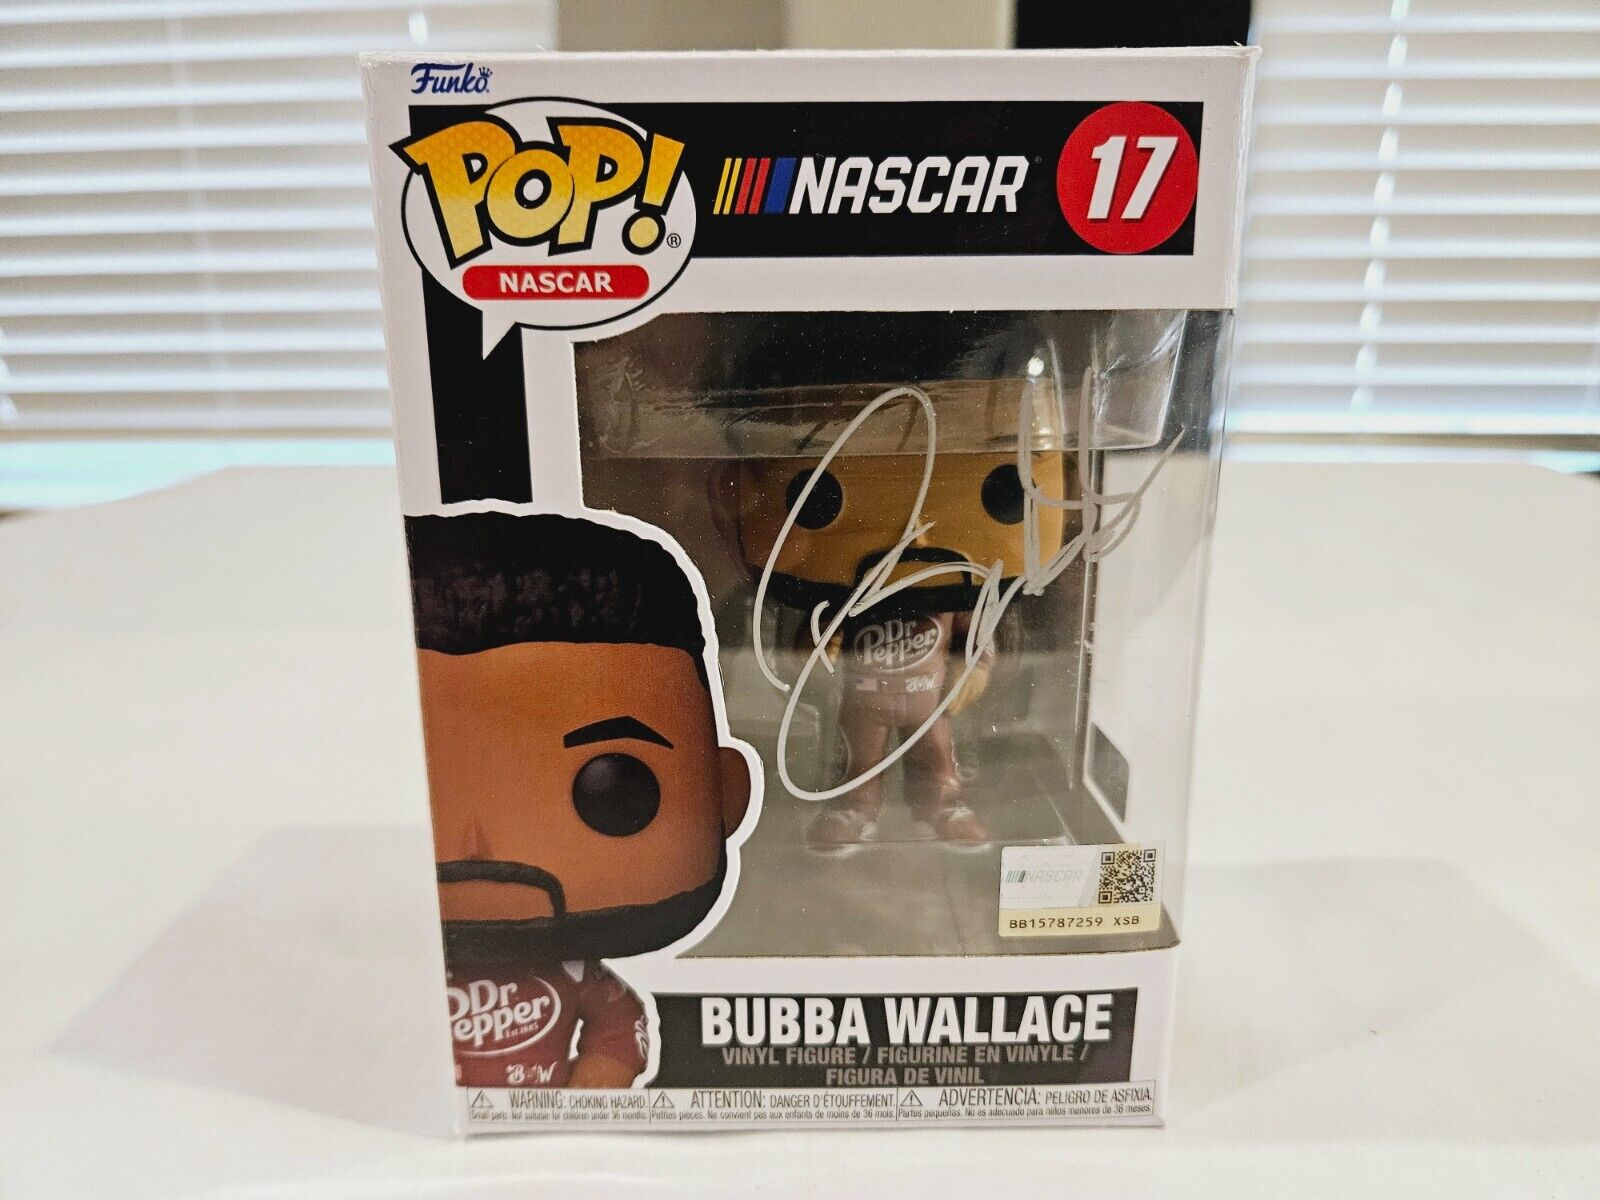 BUBBA WALLACE NASCAR RACING AUTOGRAPHED AUTO FUNKO POP Pristine Certified